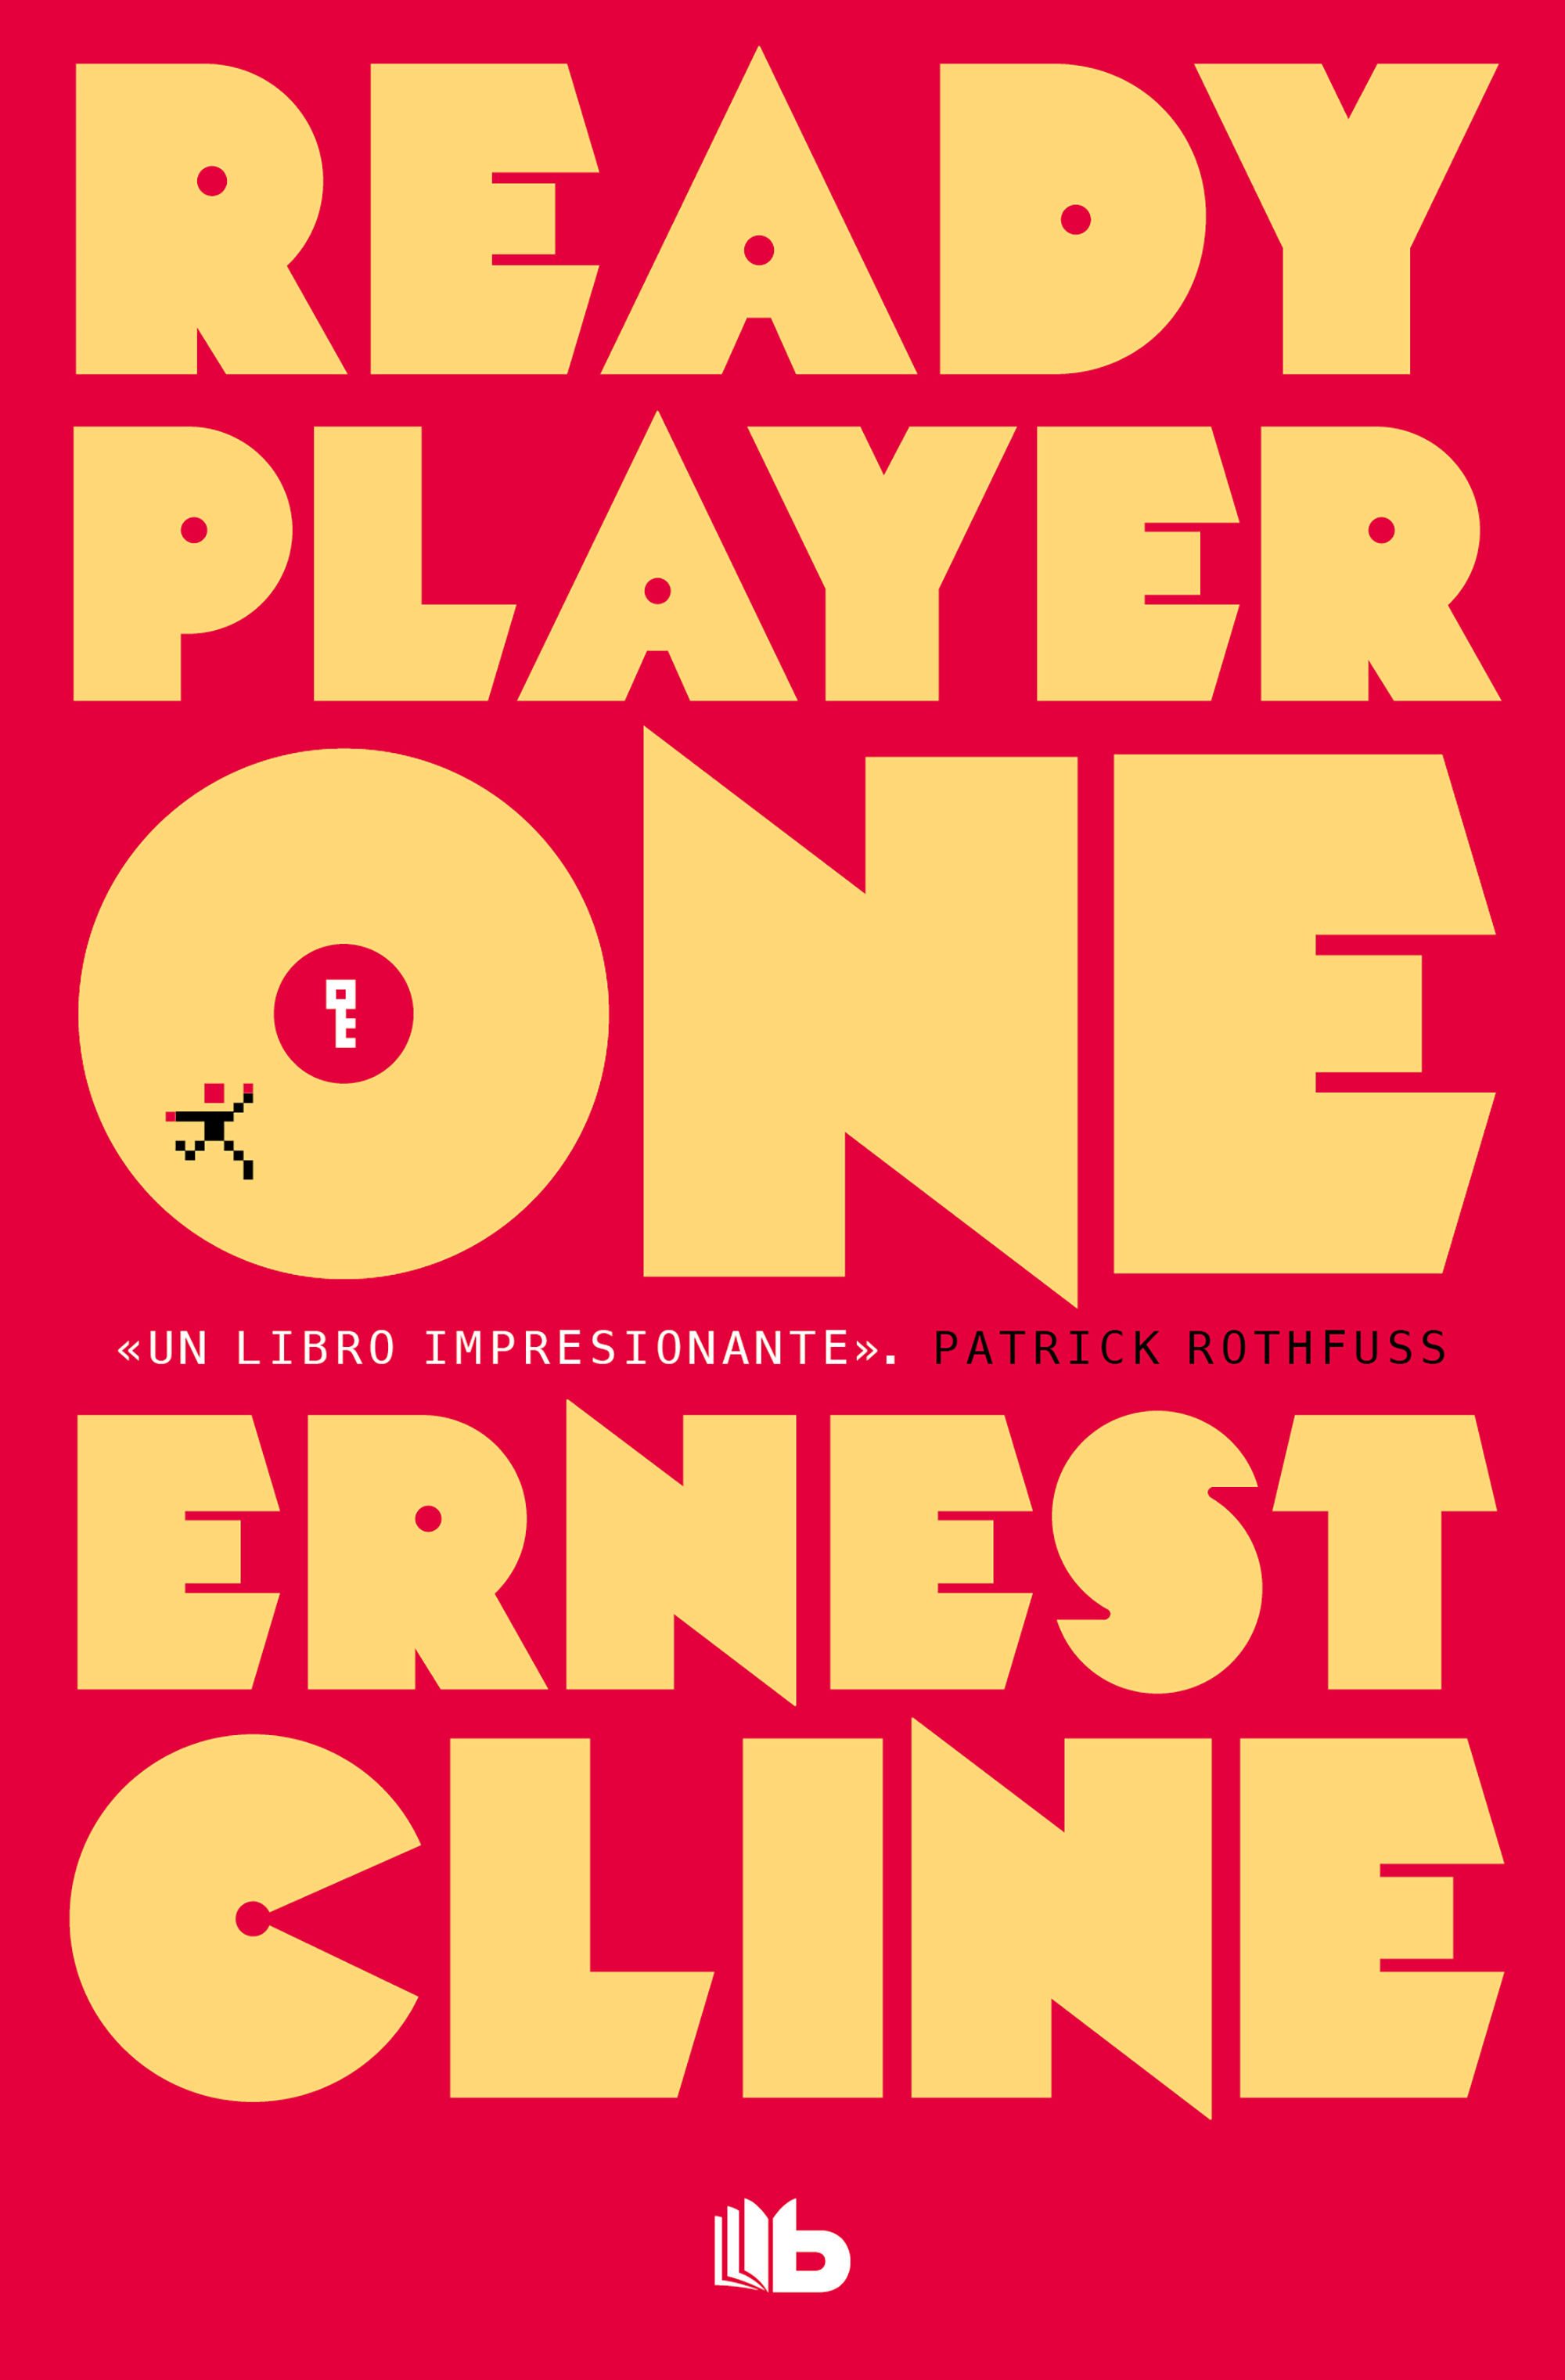 READY PLAYER ONE. 